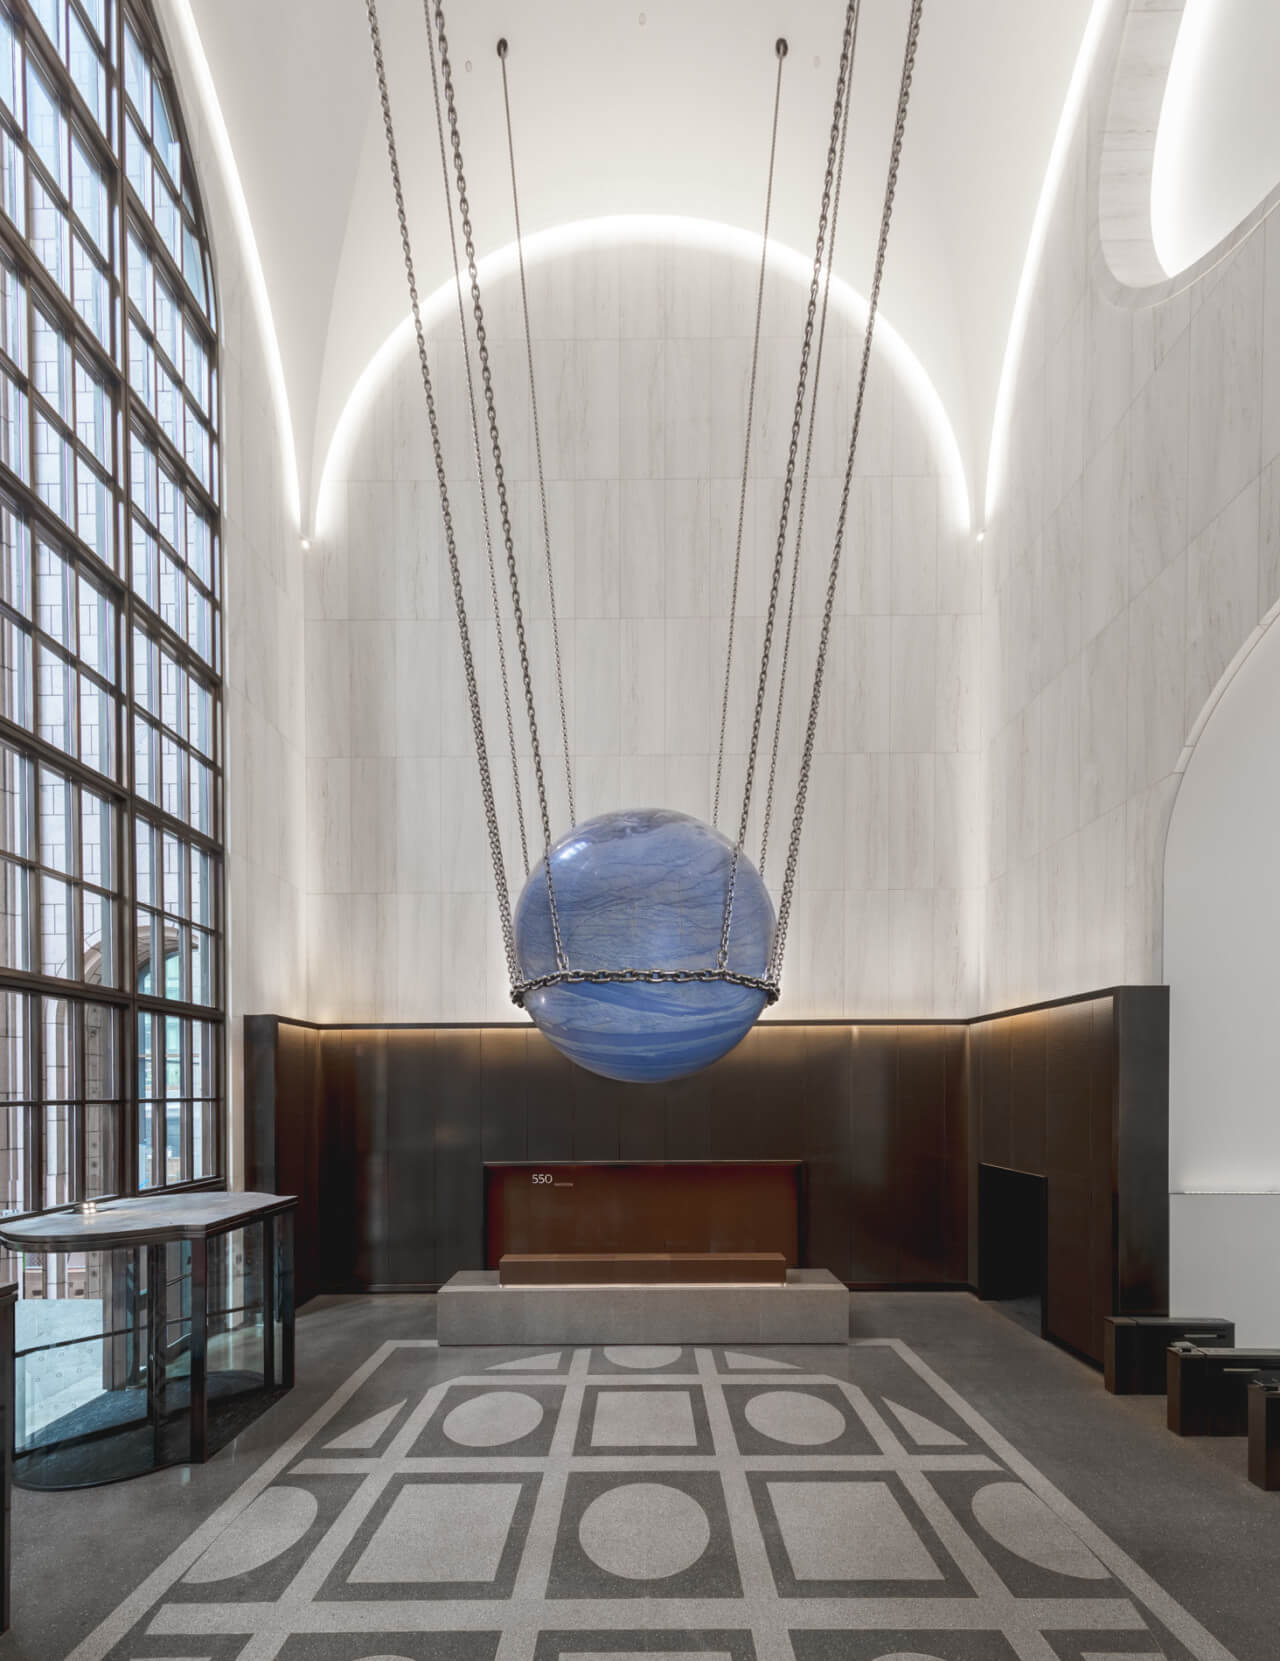 A blue sphere designed by alicja kwade hanging from the ceiling at 550 madison